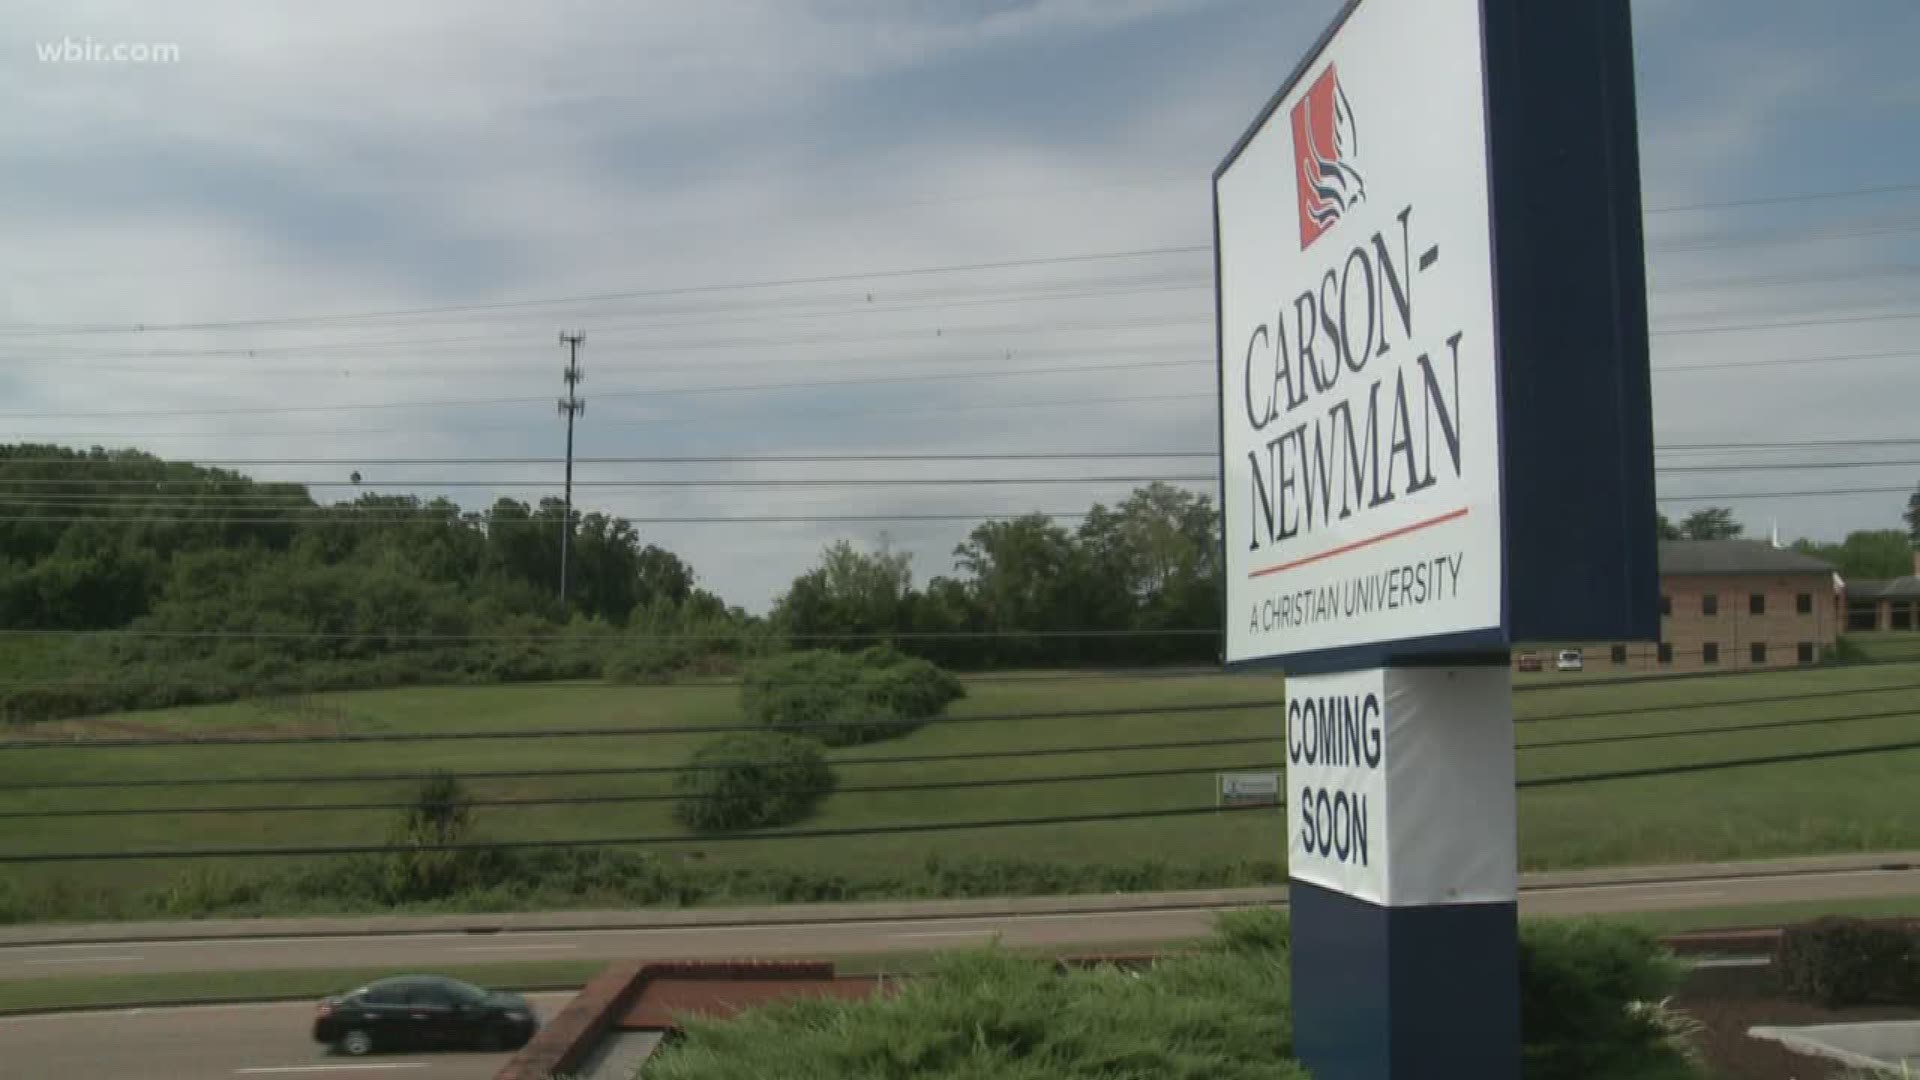 CarsonINewman University cut the ribbon on its new satellite campus in Knox County.